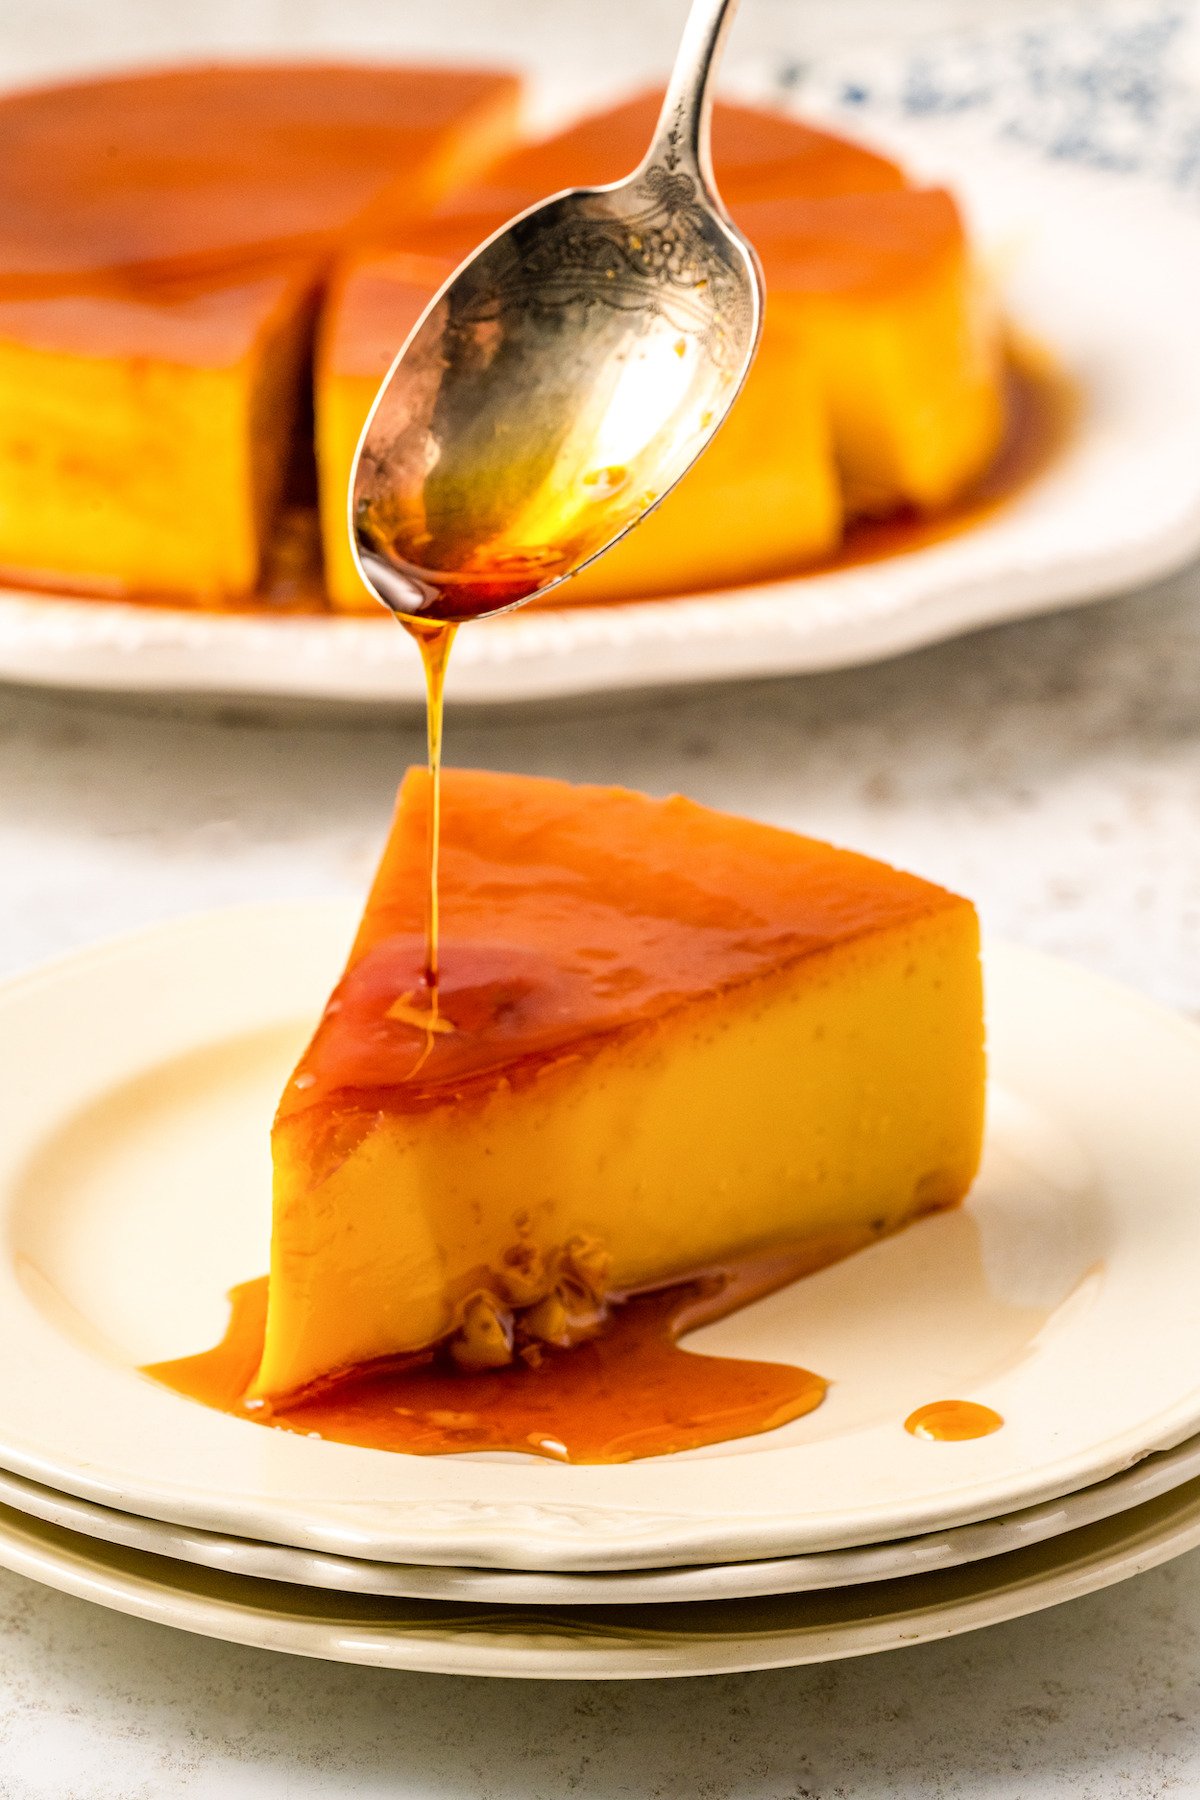 Drizzling caramel over a slice of flan.